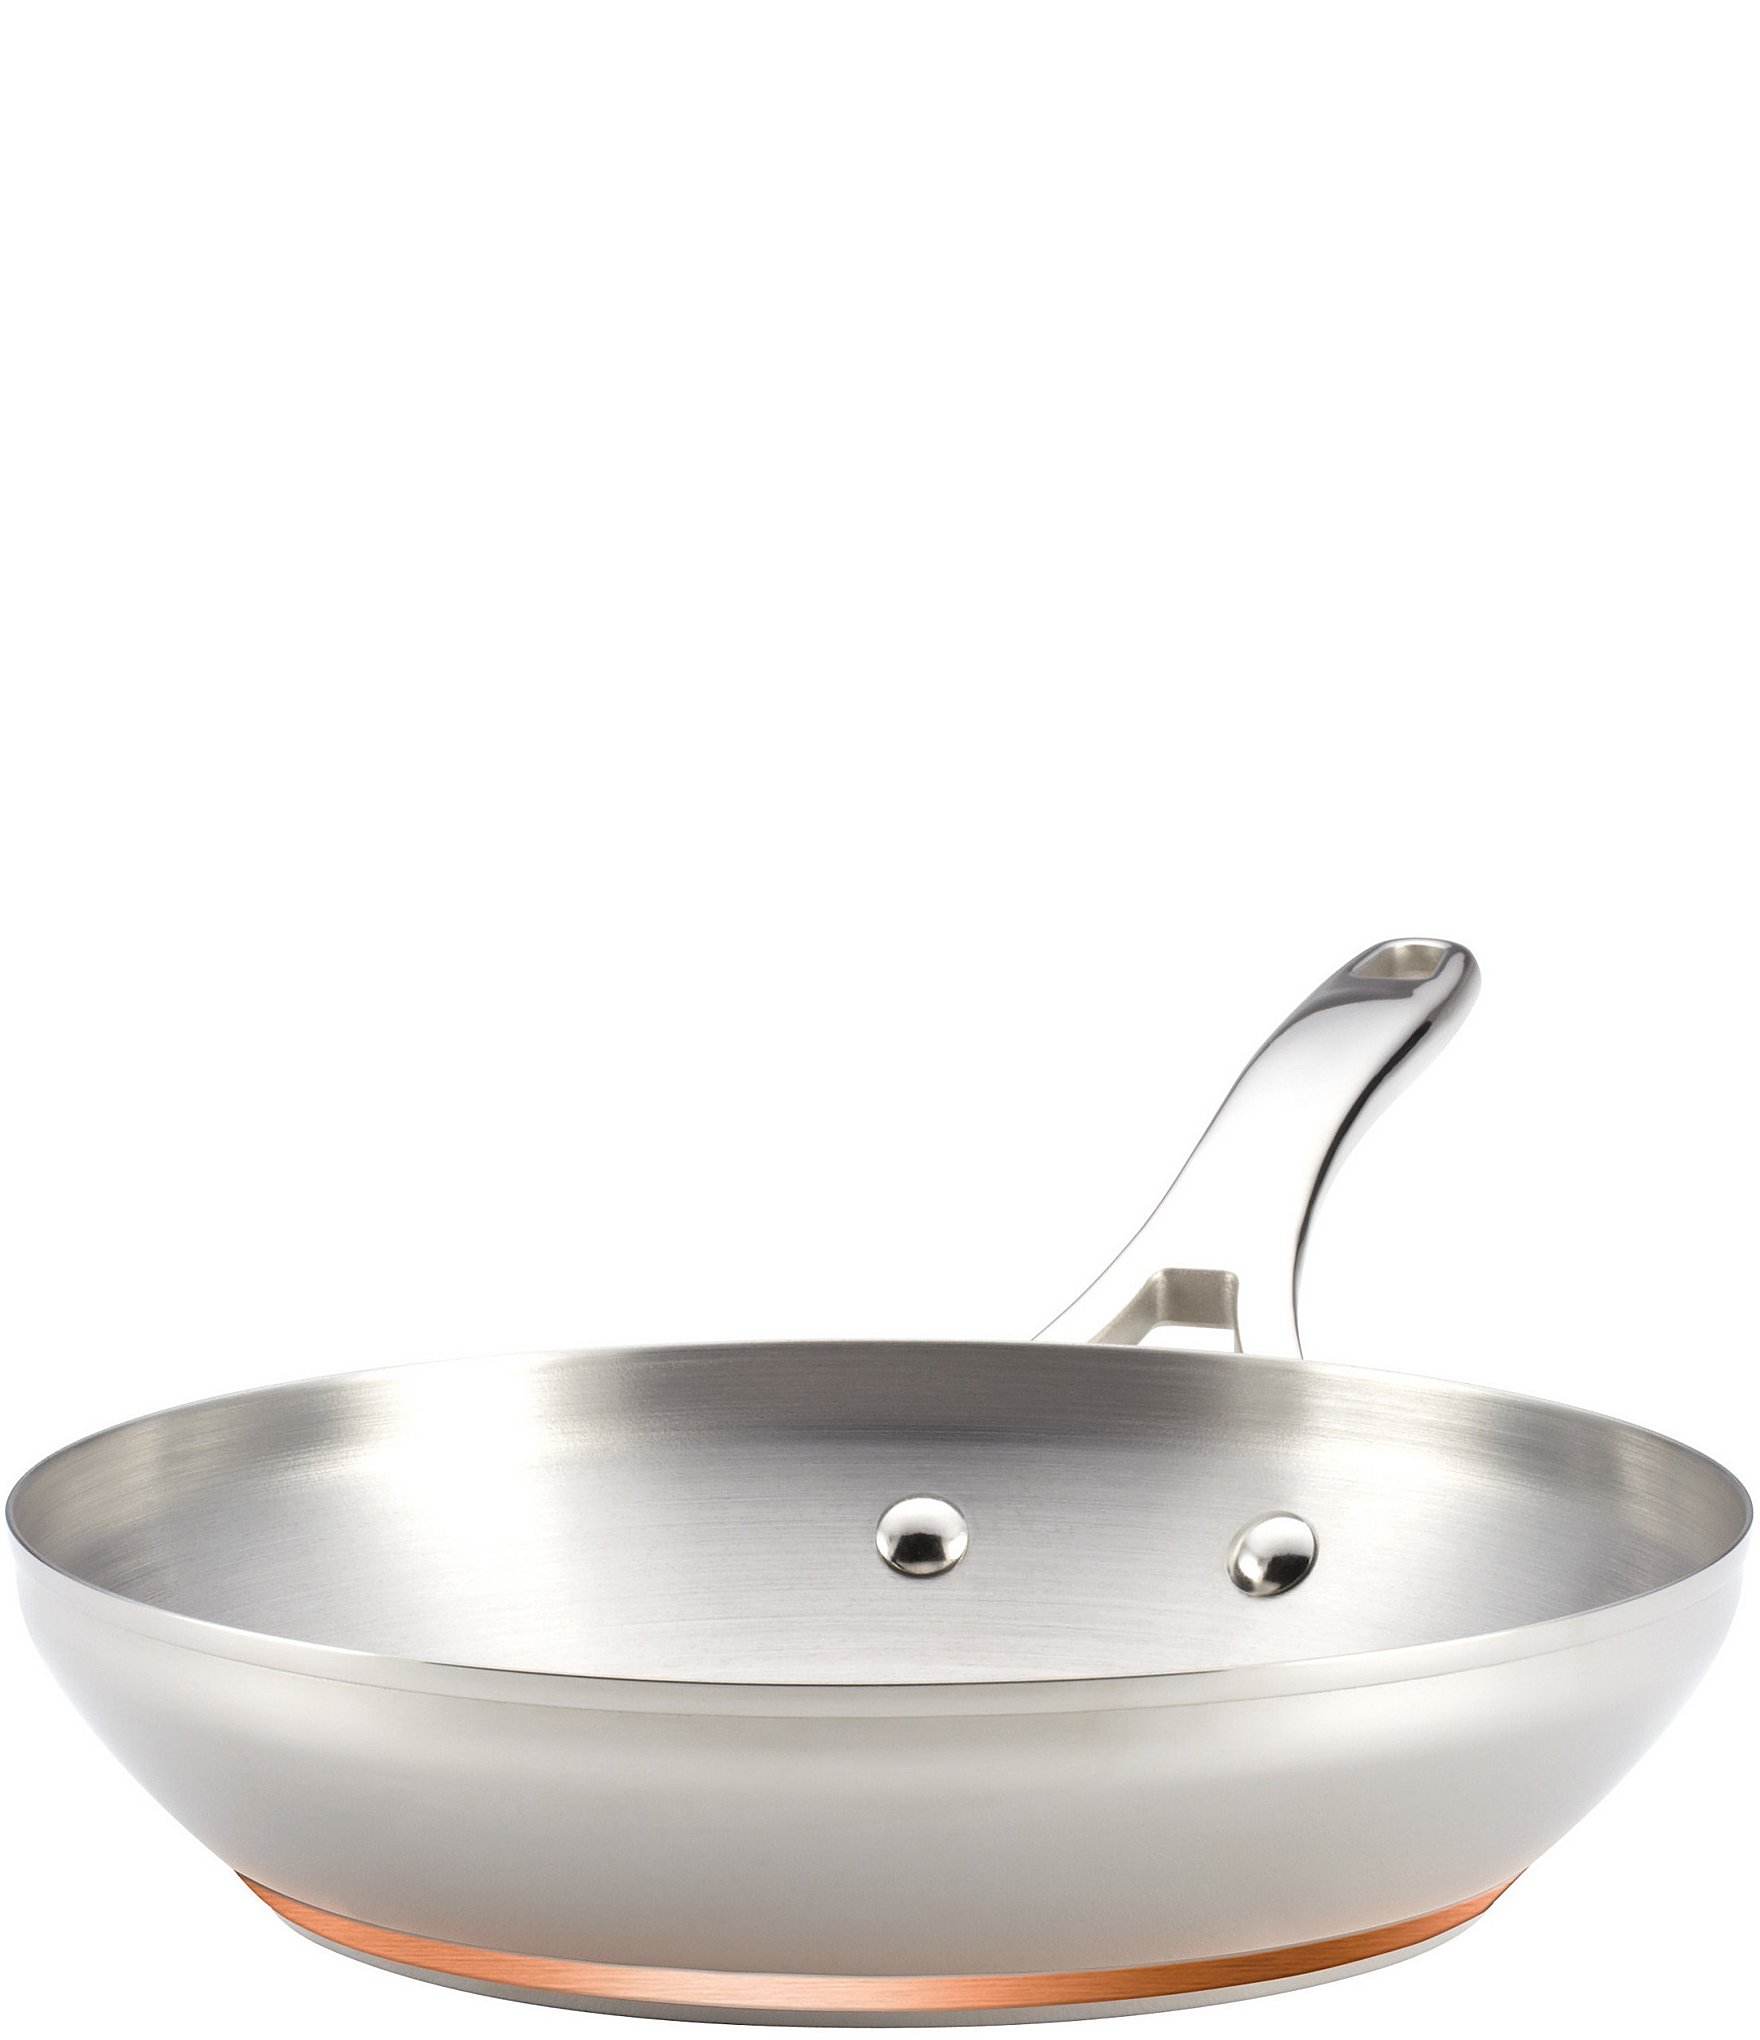 https://dimg.dillards.com/is/image/DillardsZoom/zoom/anolon-nouvelle-copper-stainless-steel-12-inch-covered-french-skillet/20001601_zi.jpg